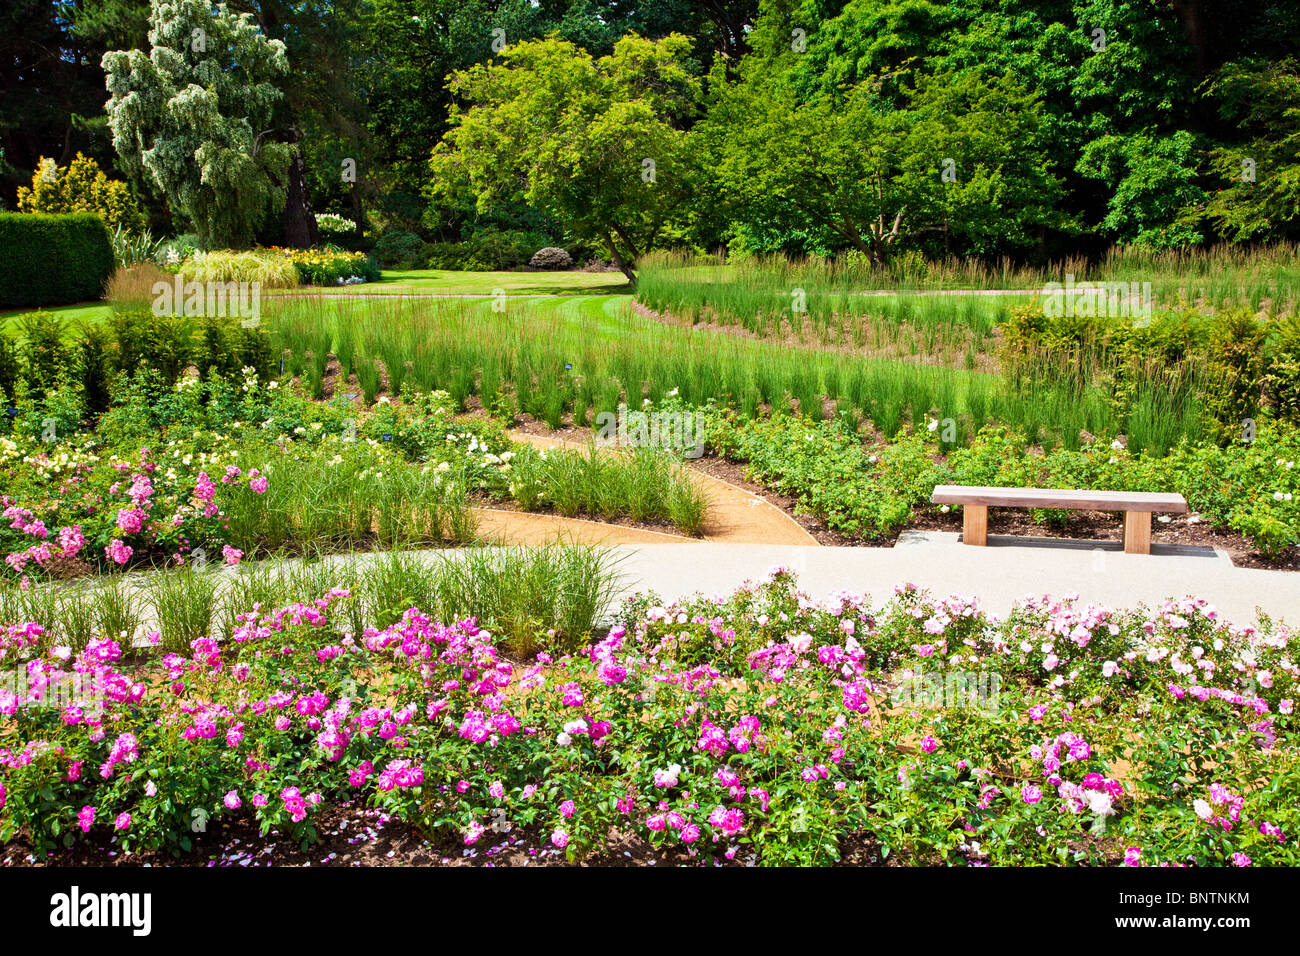 View from the new Rose Garden,opened in 2010, in the Savill Gardens, part of the Royal Landscape, near Windsor, England, UK Stock Photo